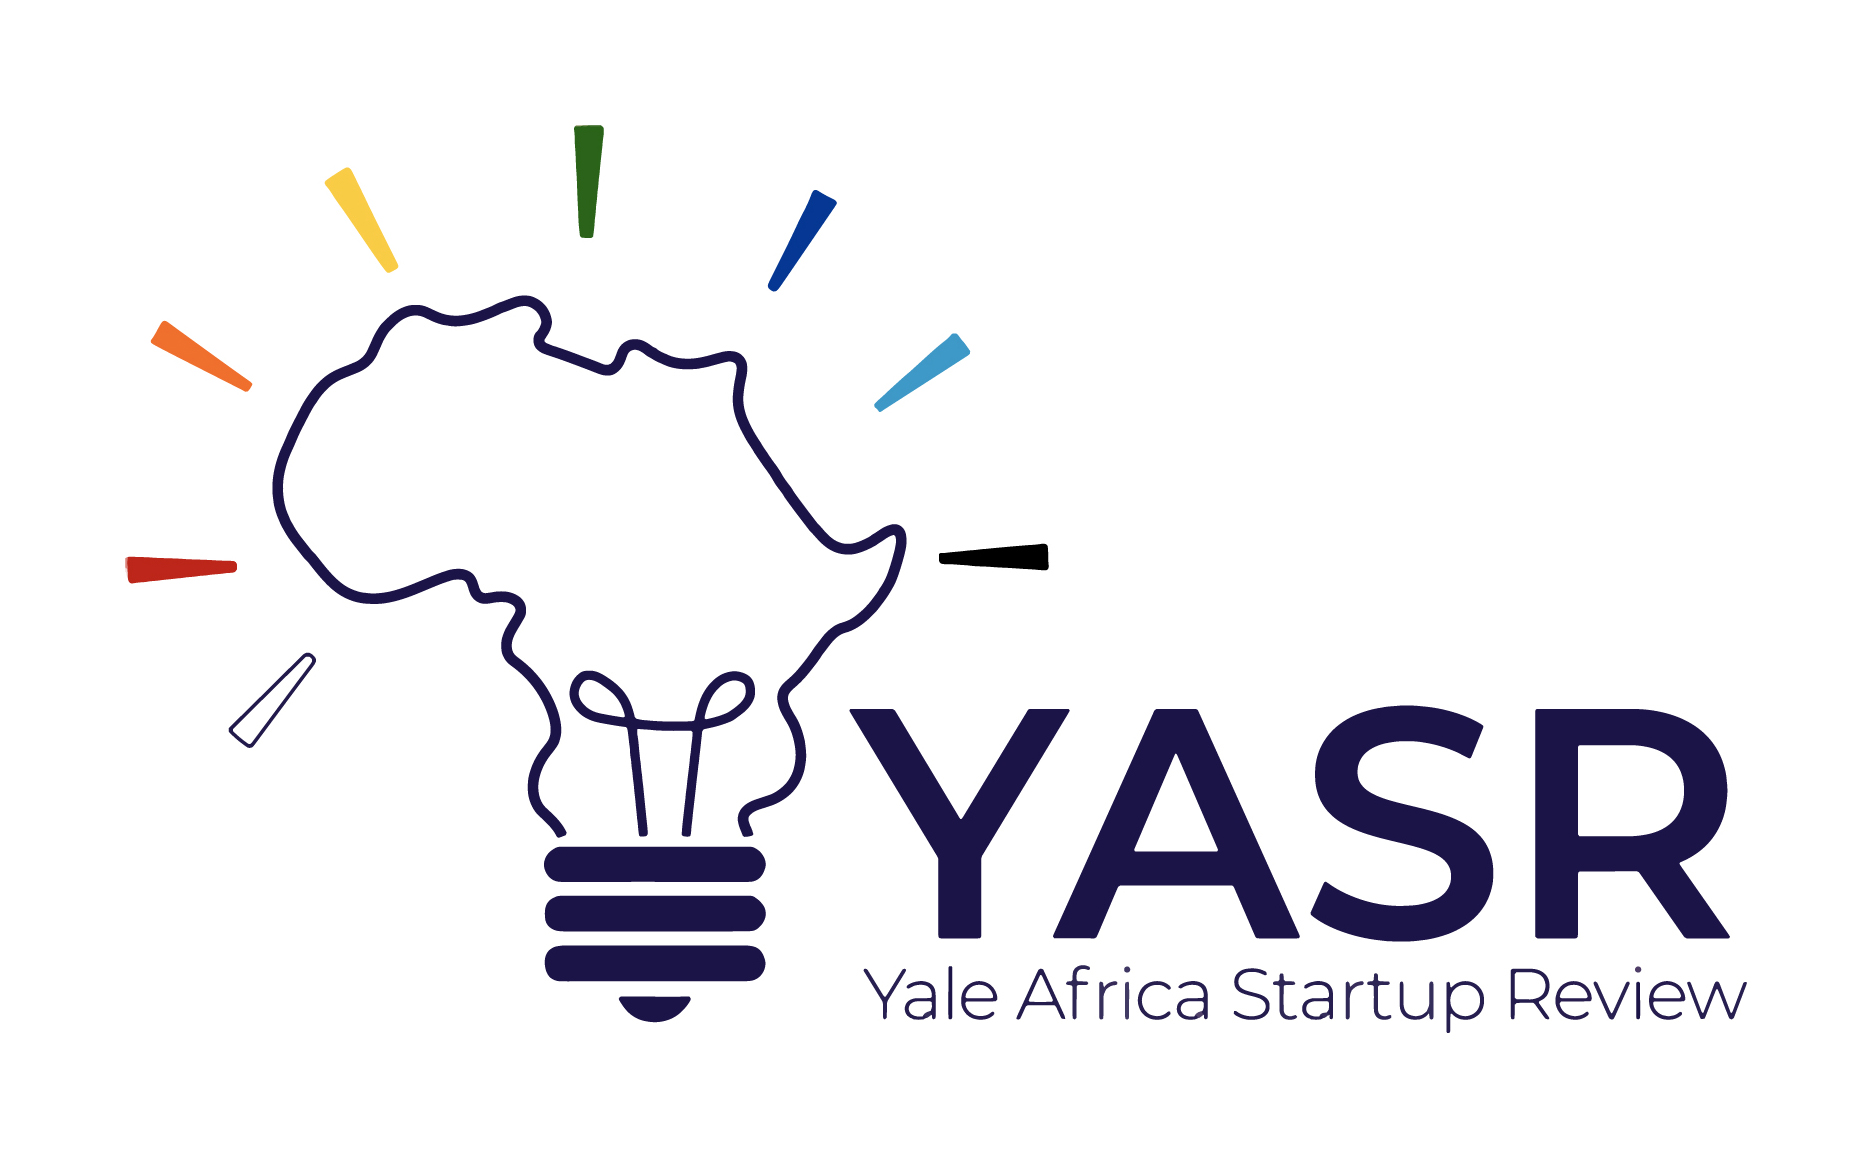 Yale Africa Startup Review logo